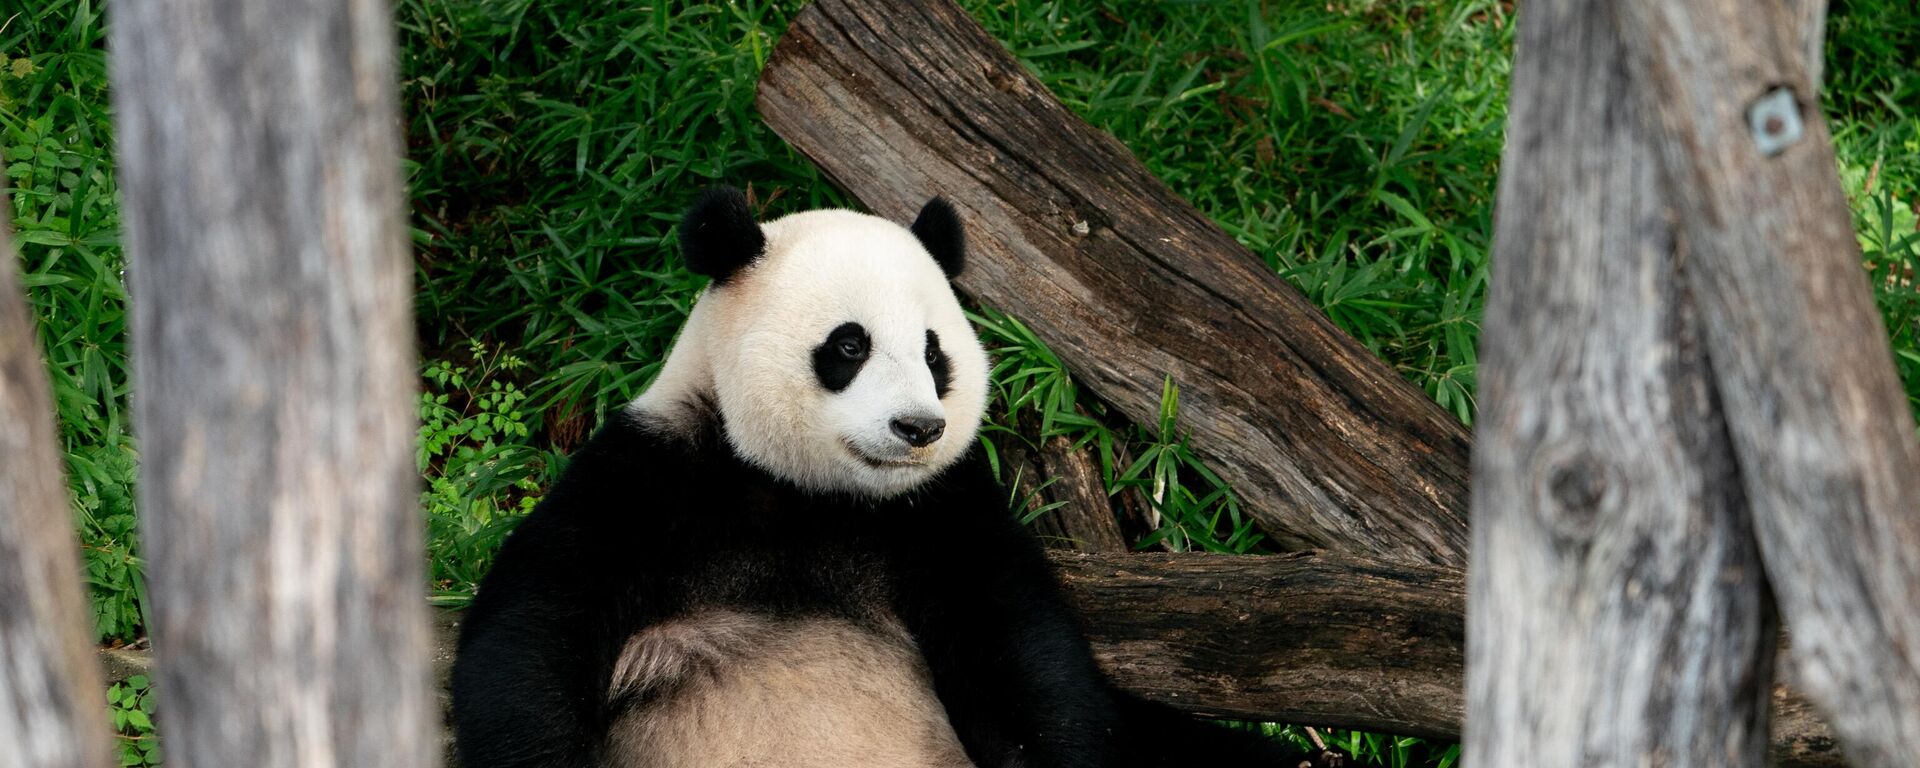 Giant Panda Xiao Qi Ji lounges after eating honey-covered treats to celebrate his third birthday, at the Smithsonian National Zoo in Washington, DC, on August 21, 2023. All three giant pandas at the National Zoo, Xiao Qi Ji, Tian Tian, and Mei Xiang, are celebrating their final birthdays in Washington, as they are expected to be returned to China by December 7, 2023. - Sputnik International, 1920, 29.08.2023